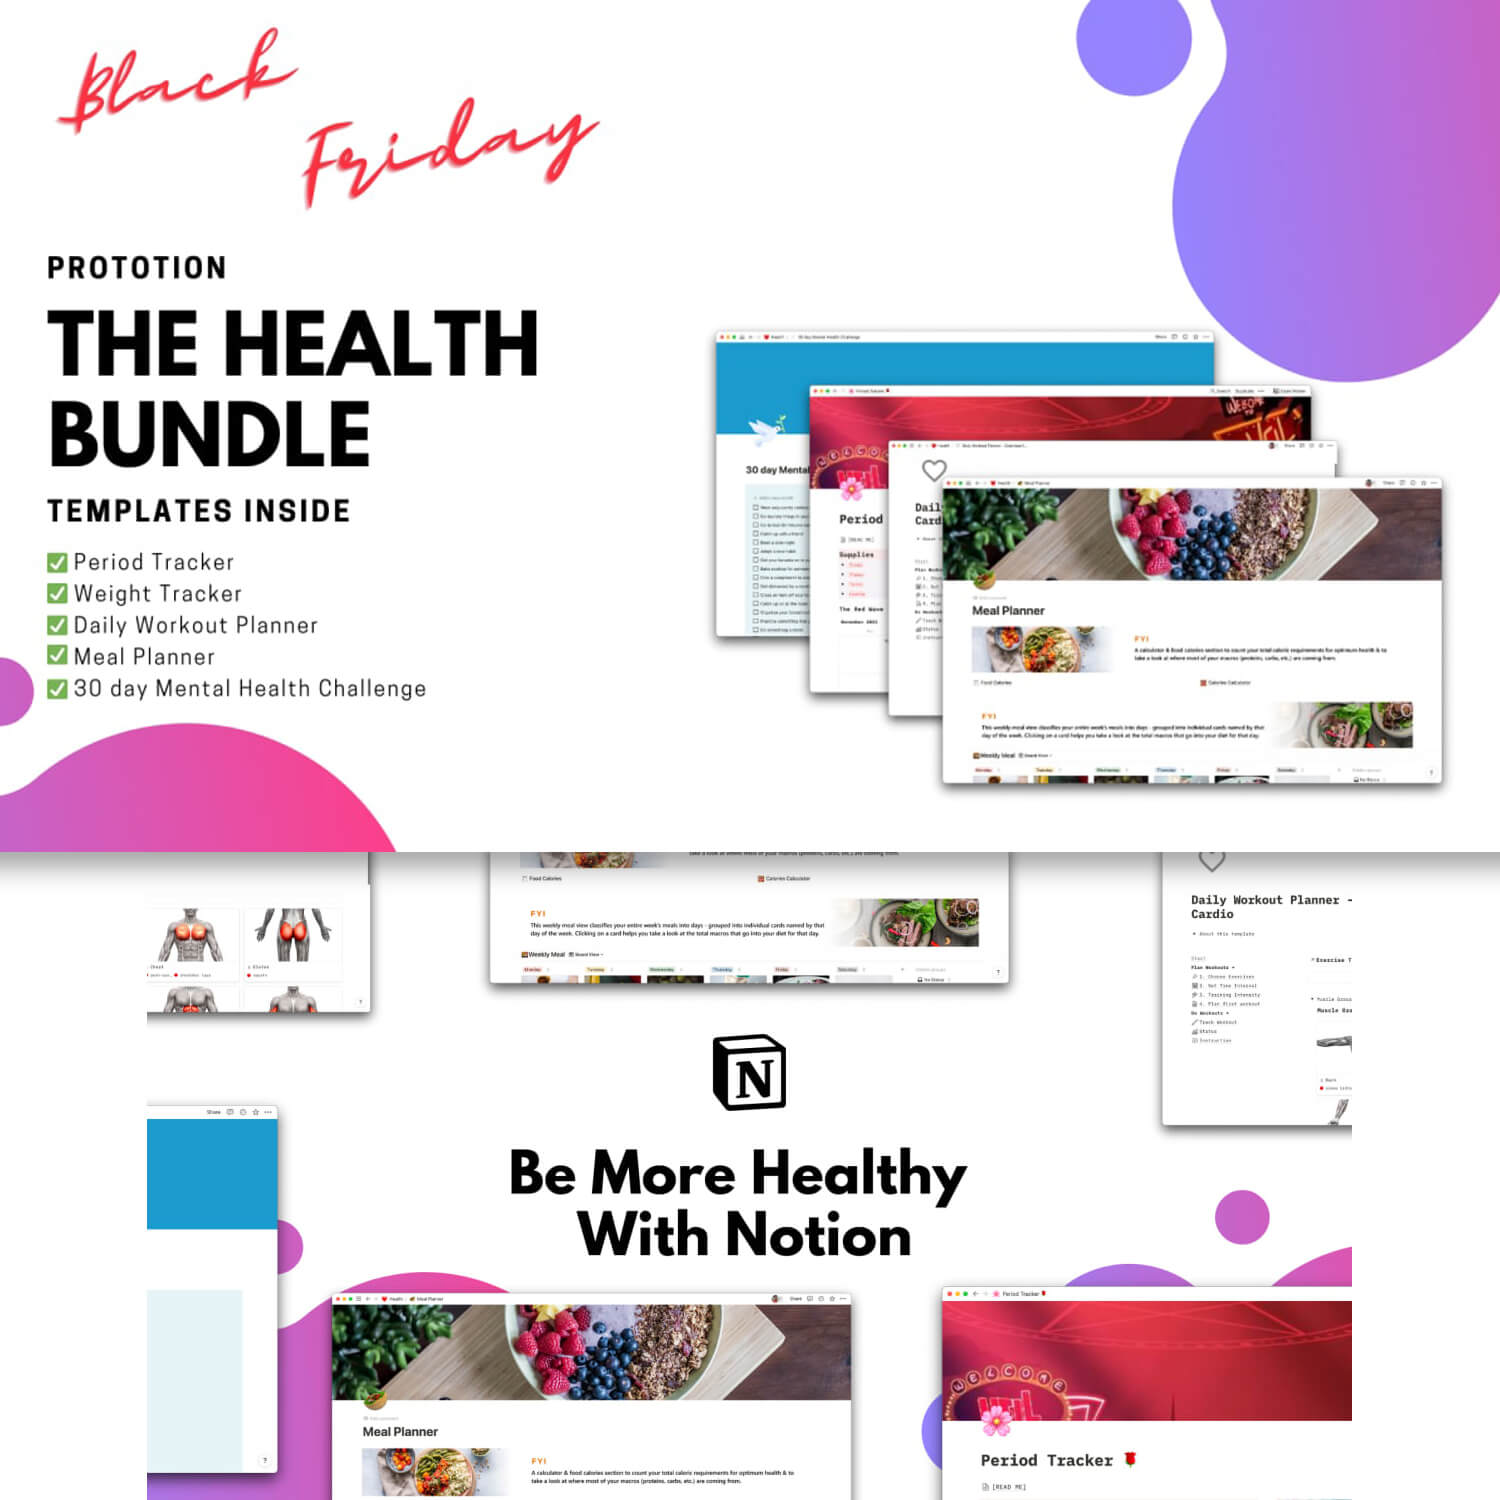 Two slides with information about the health bundle.